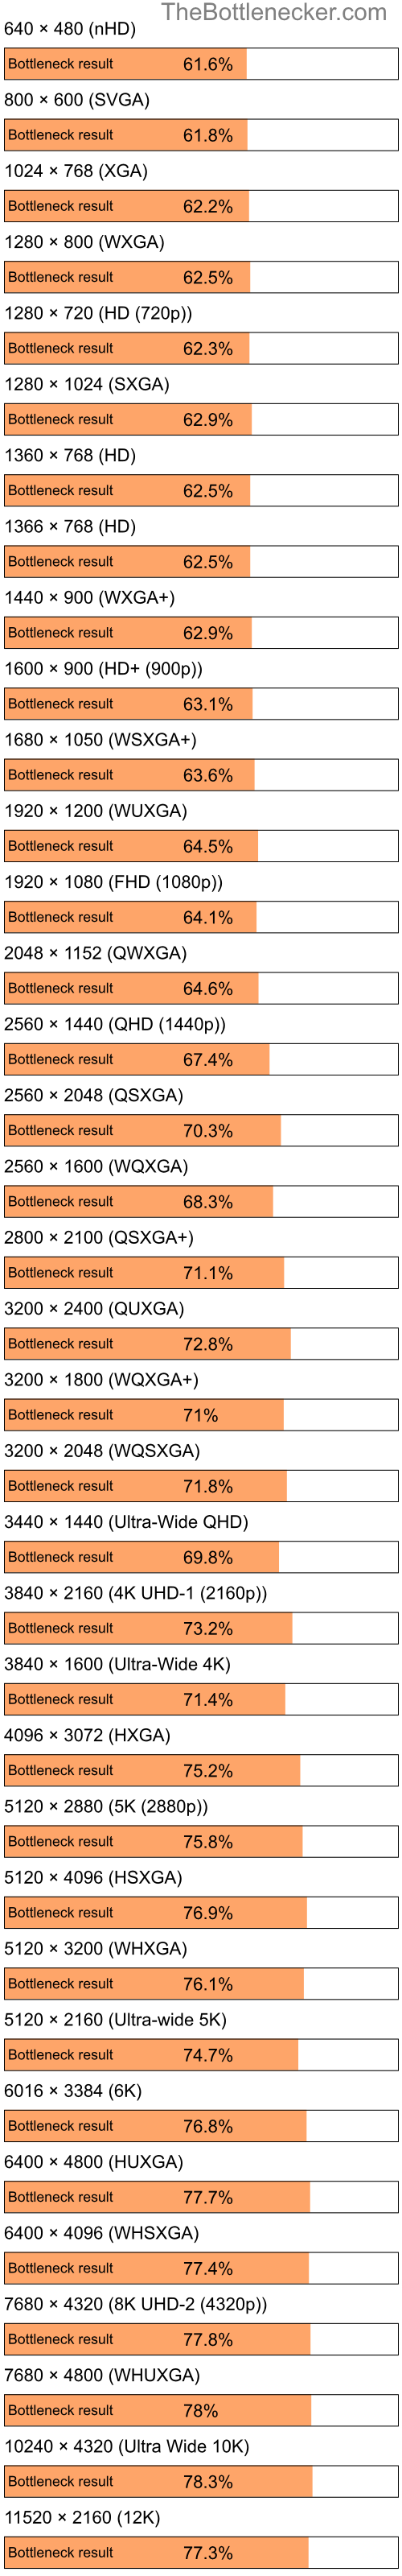 Bottleneck results by resolution for Intel Celeron M 410 and AMD Radeon HD 7290 in7 Days to Die